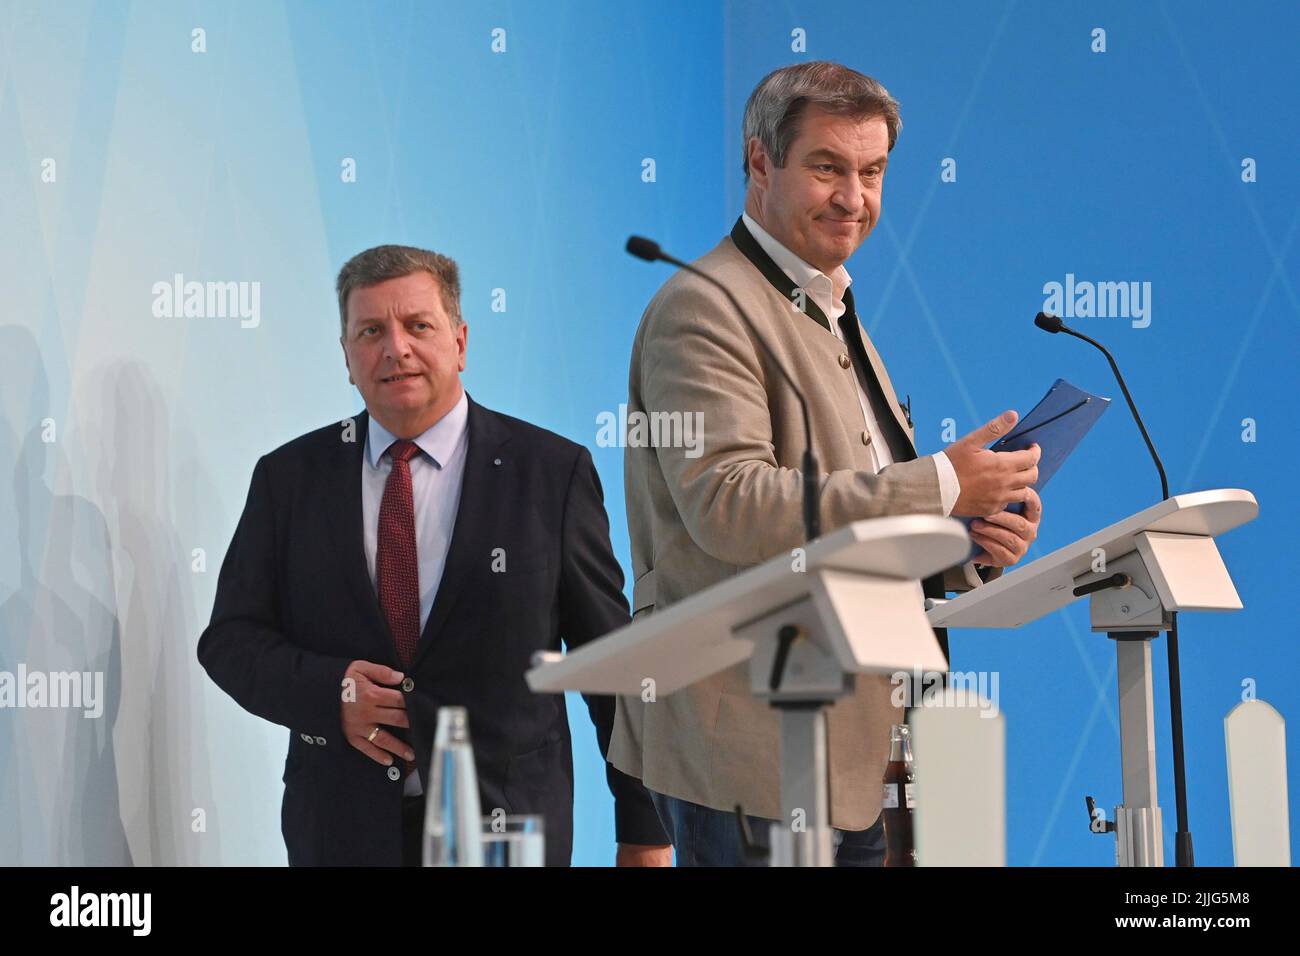 From left: Christian BERNREITER (Minister of Transport), Markus SOEDER (Prime Minister of Bavaria and CSU Chairman). Press conference of the Bavarian state government after the cabinet meeting on July 26th, 2022 in the Prince Carl Palais in Munich. ?SVEN SIMON Photo Agency GmbH & Co. Press Photo KG # Princess-Luise-Str. 41 # 45479 M uelheim/R uhr # Tel. 0208/9413250 # Fax. 0208/9413260 # GLS Bank # BLZ 430 609 67 # Account 4030 025 100 # IBAN DE75 4306 0967 4030 0251 00 # BIC GENODEM1GLS # www.svensimon.net. Stock Photo